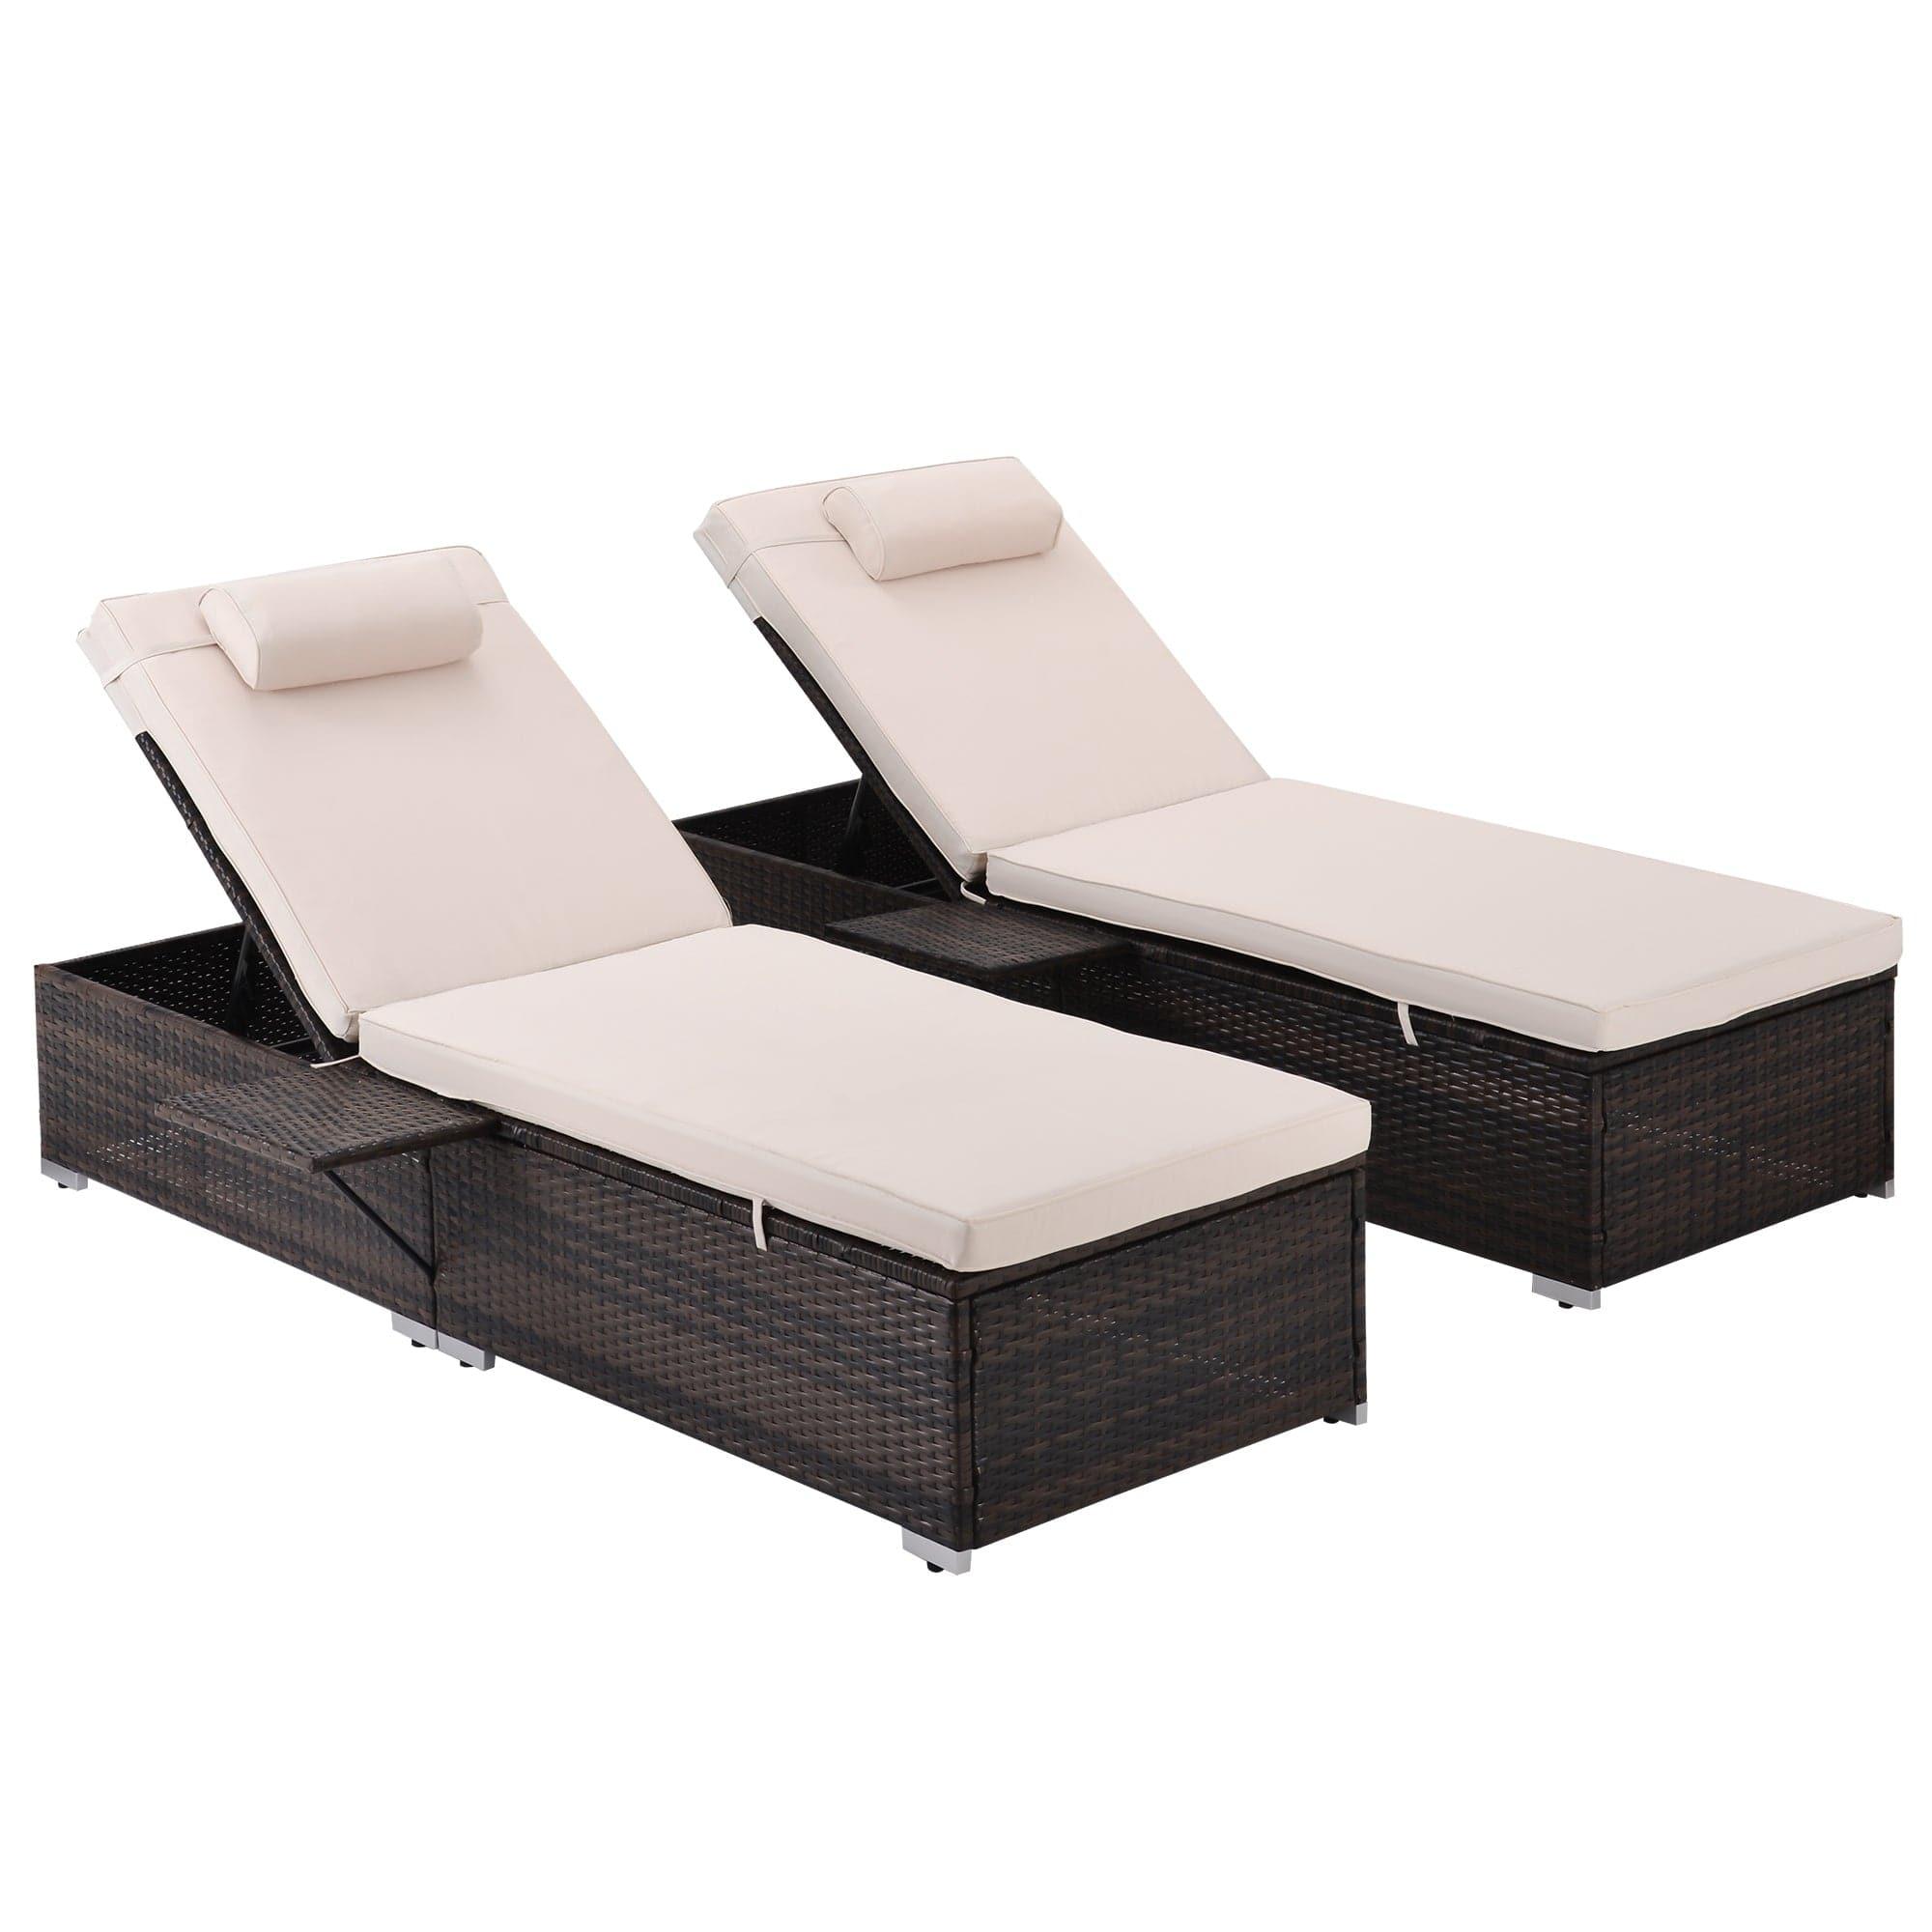 Shop Outdoor PE Wicker Chaise Lounge - 2 Piece Patio Brown Rattan Reclining Chair Furniture Set Beach Pool Adjustable Backrest Recliners with Side Table and Comfort Head Pillow （Same as W213S00037） Mademoiselle Home Decor